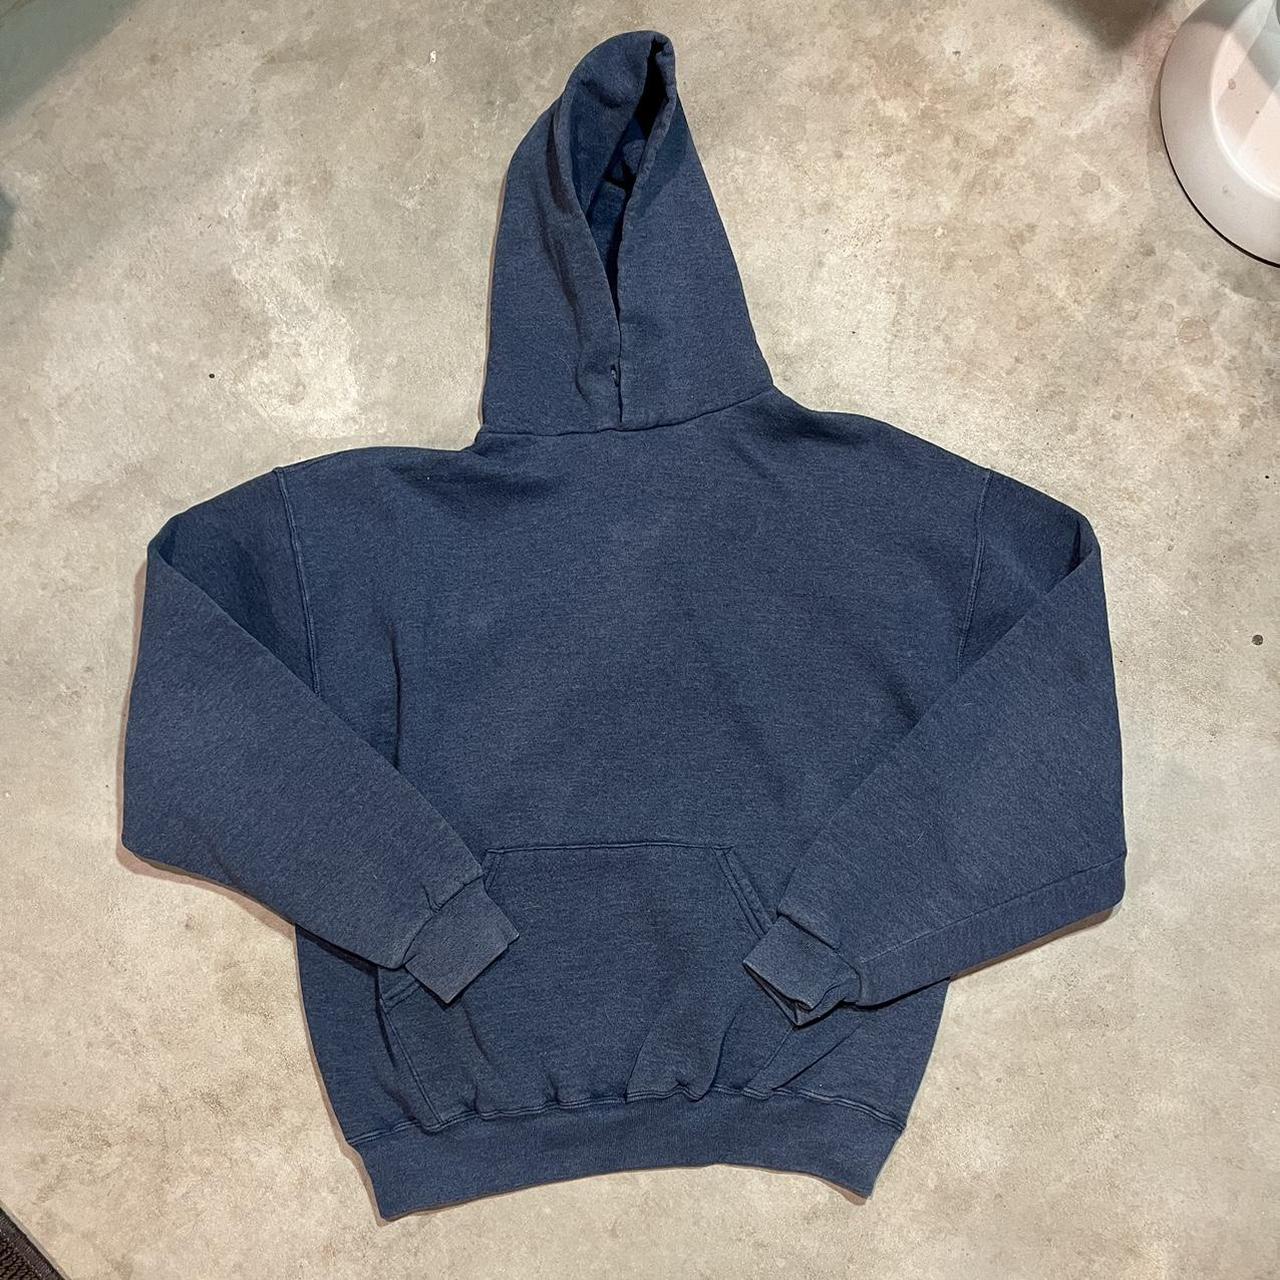 Russel hoodie Size L Msg for any other questions! - Depop